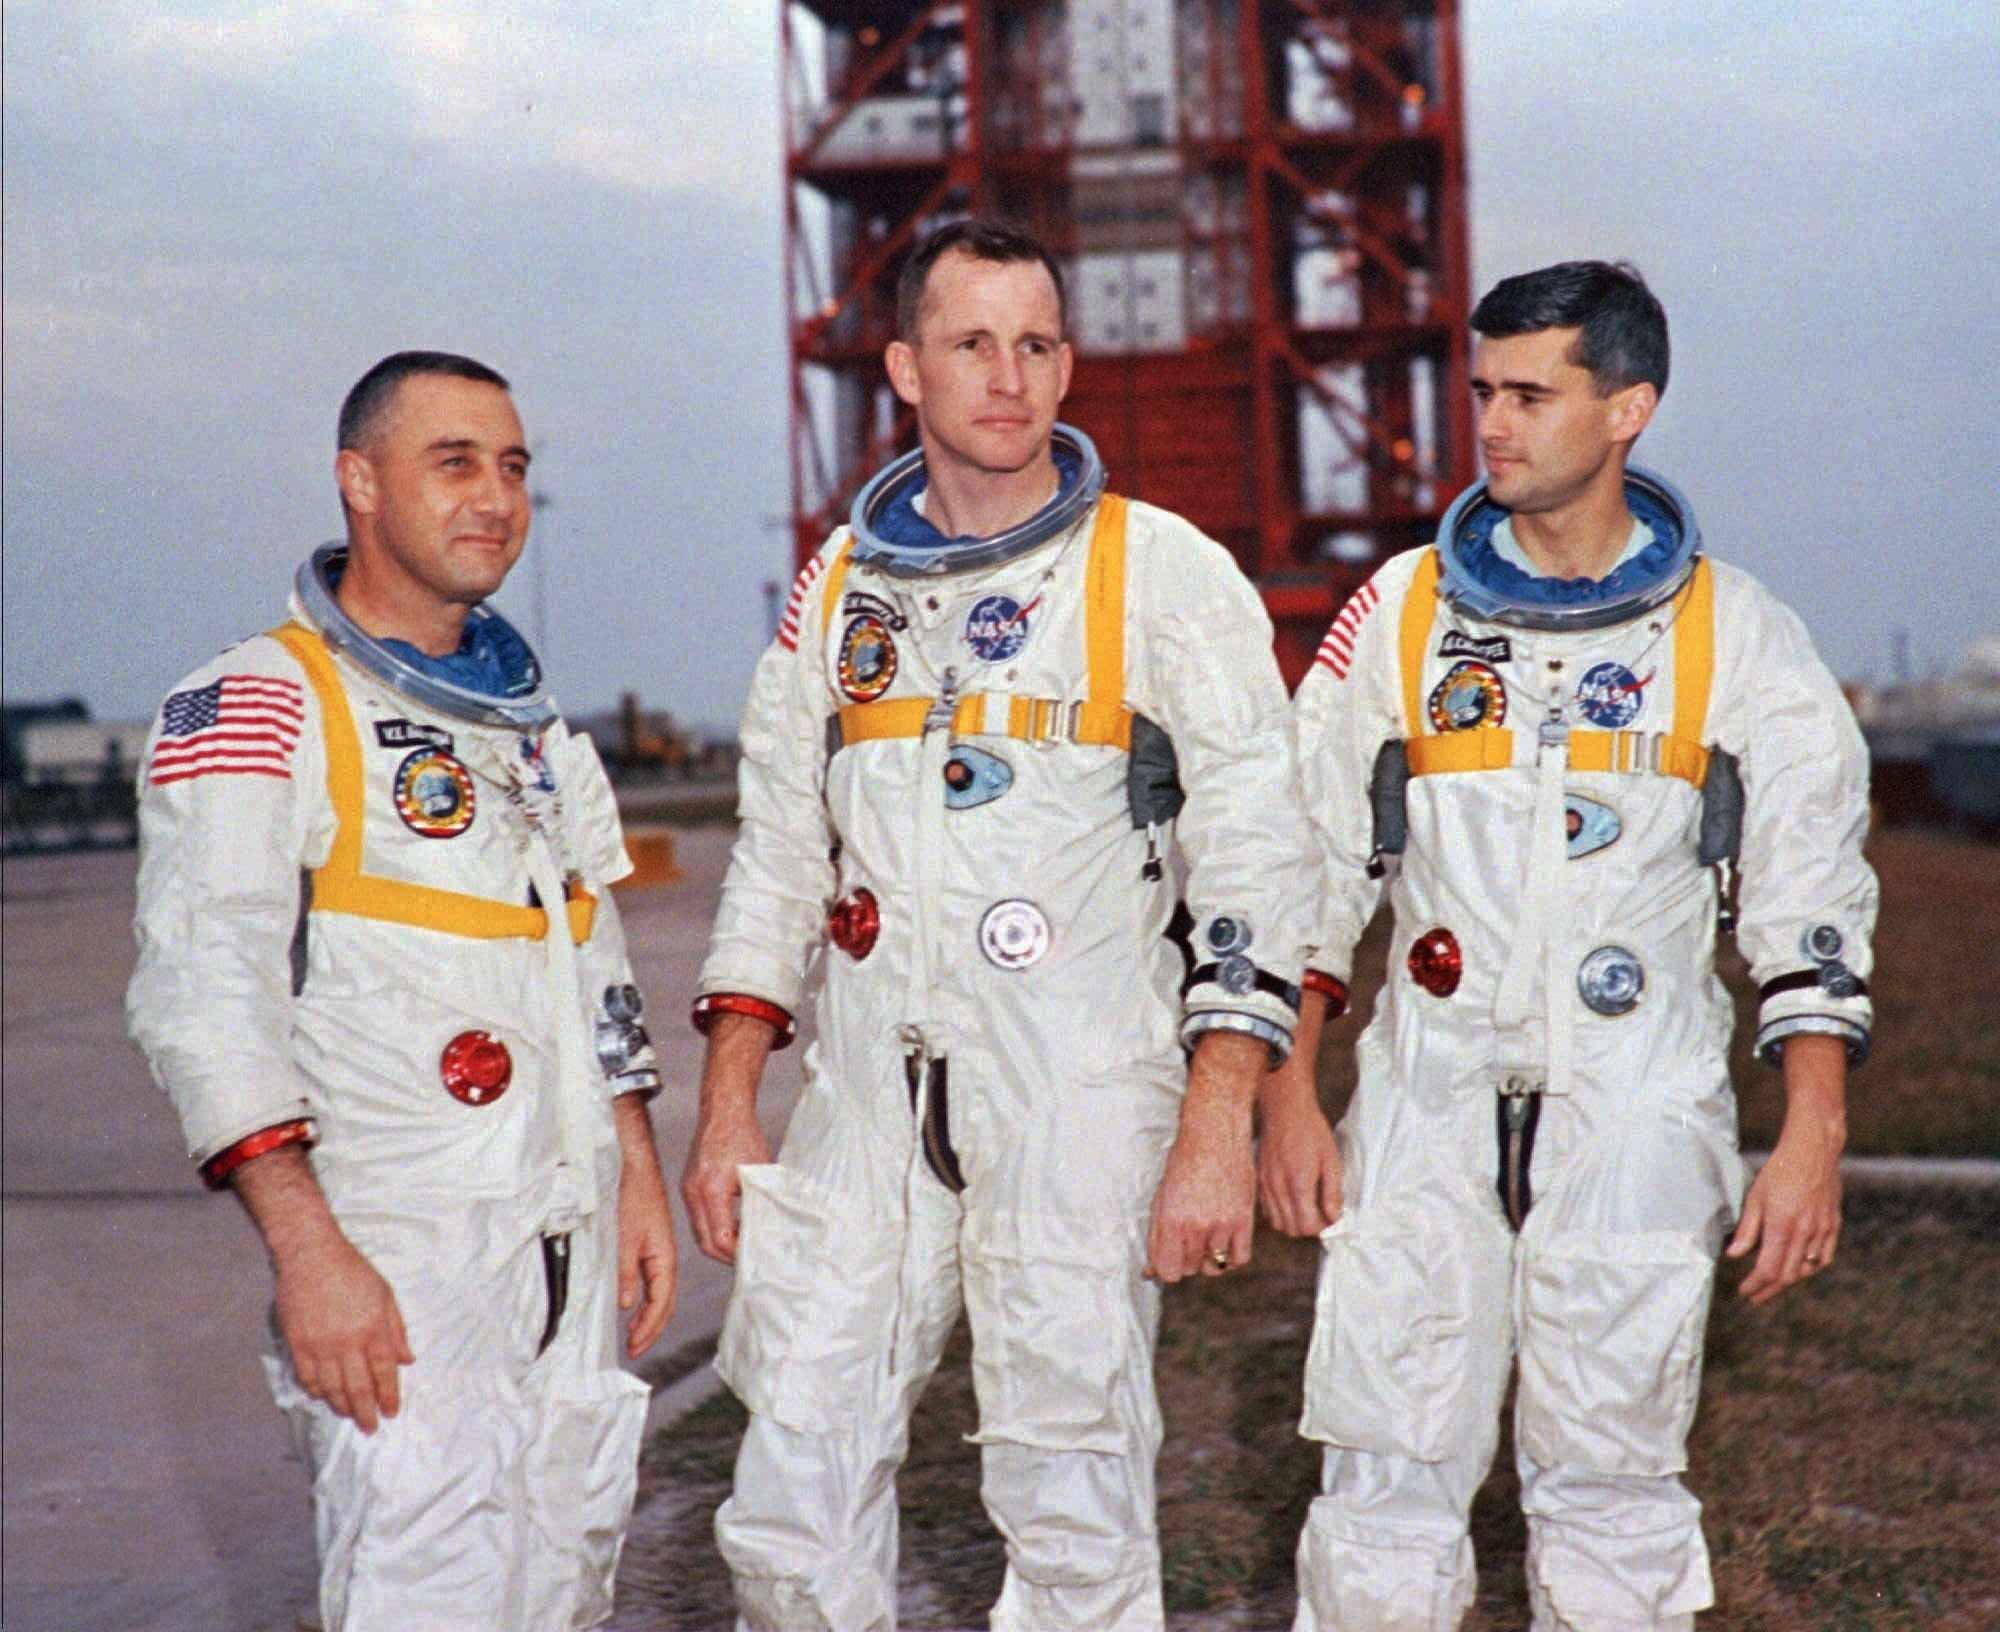 The Apollo 1 crew of Virgi "Gus" Grissom, Ed White and Roger Chaffee